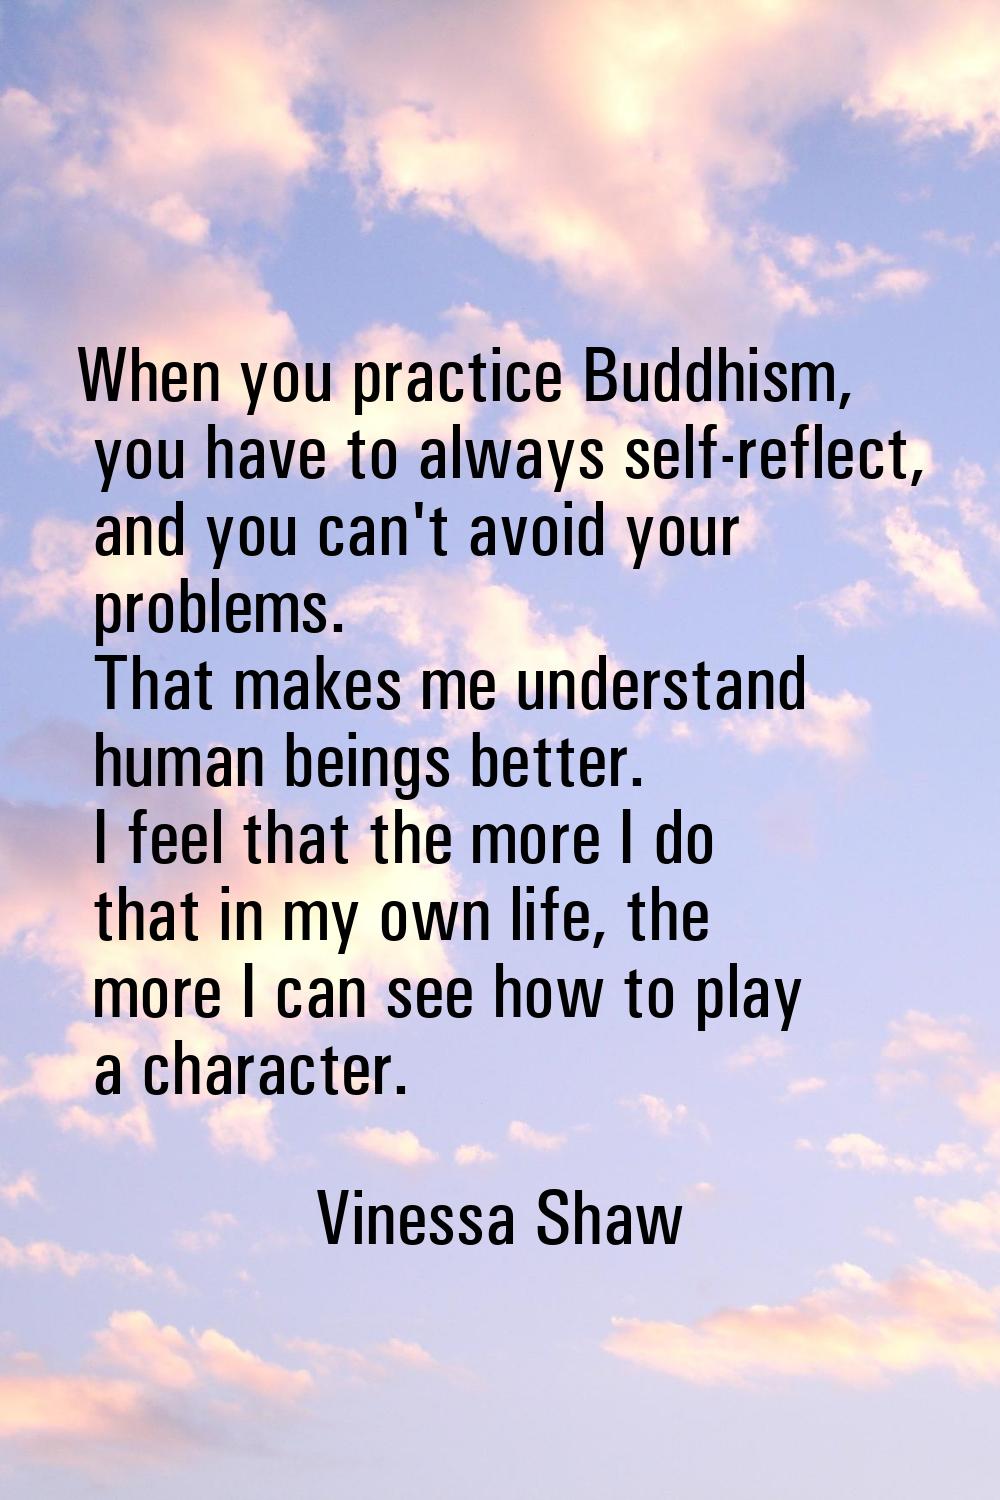 When you practice Buddhism, you have to always self-reflect, and you can't avoid your problems. Tha